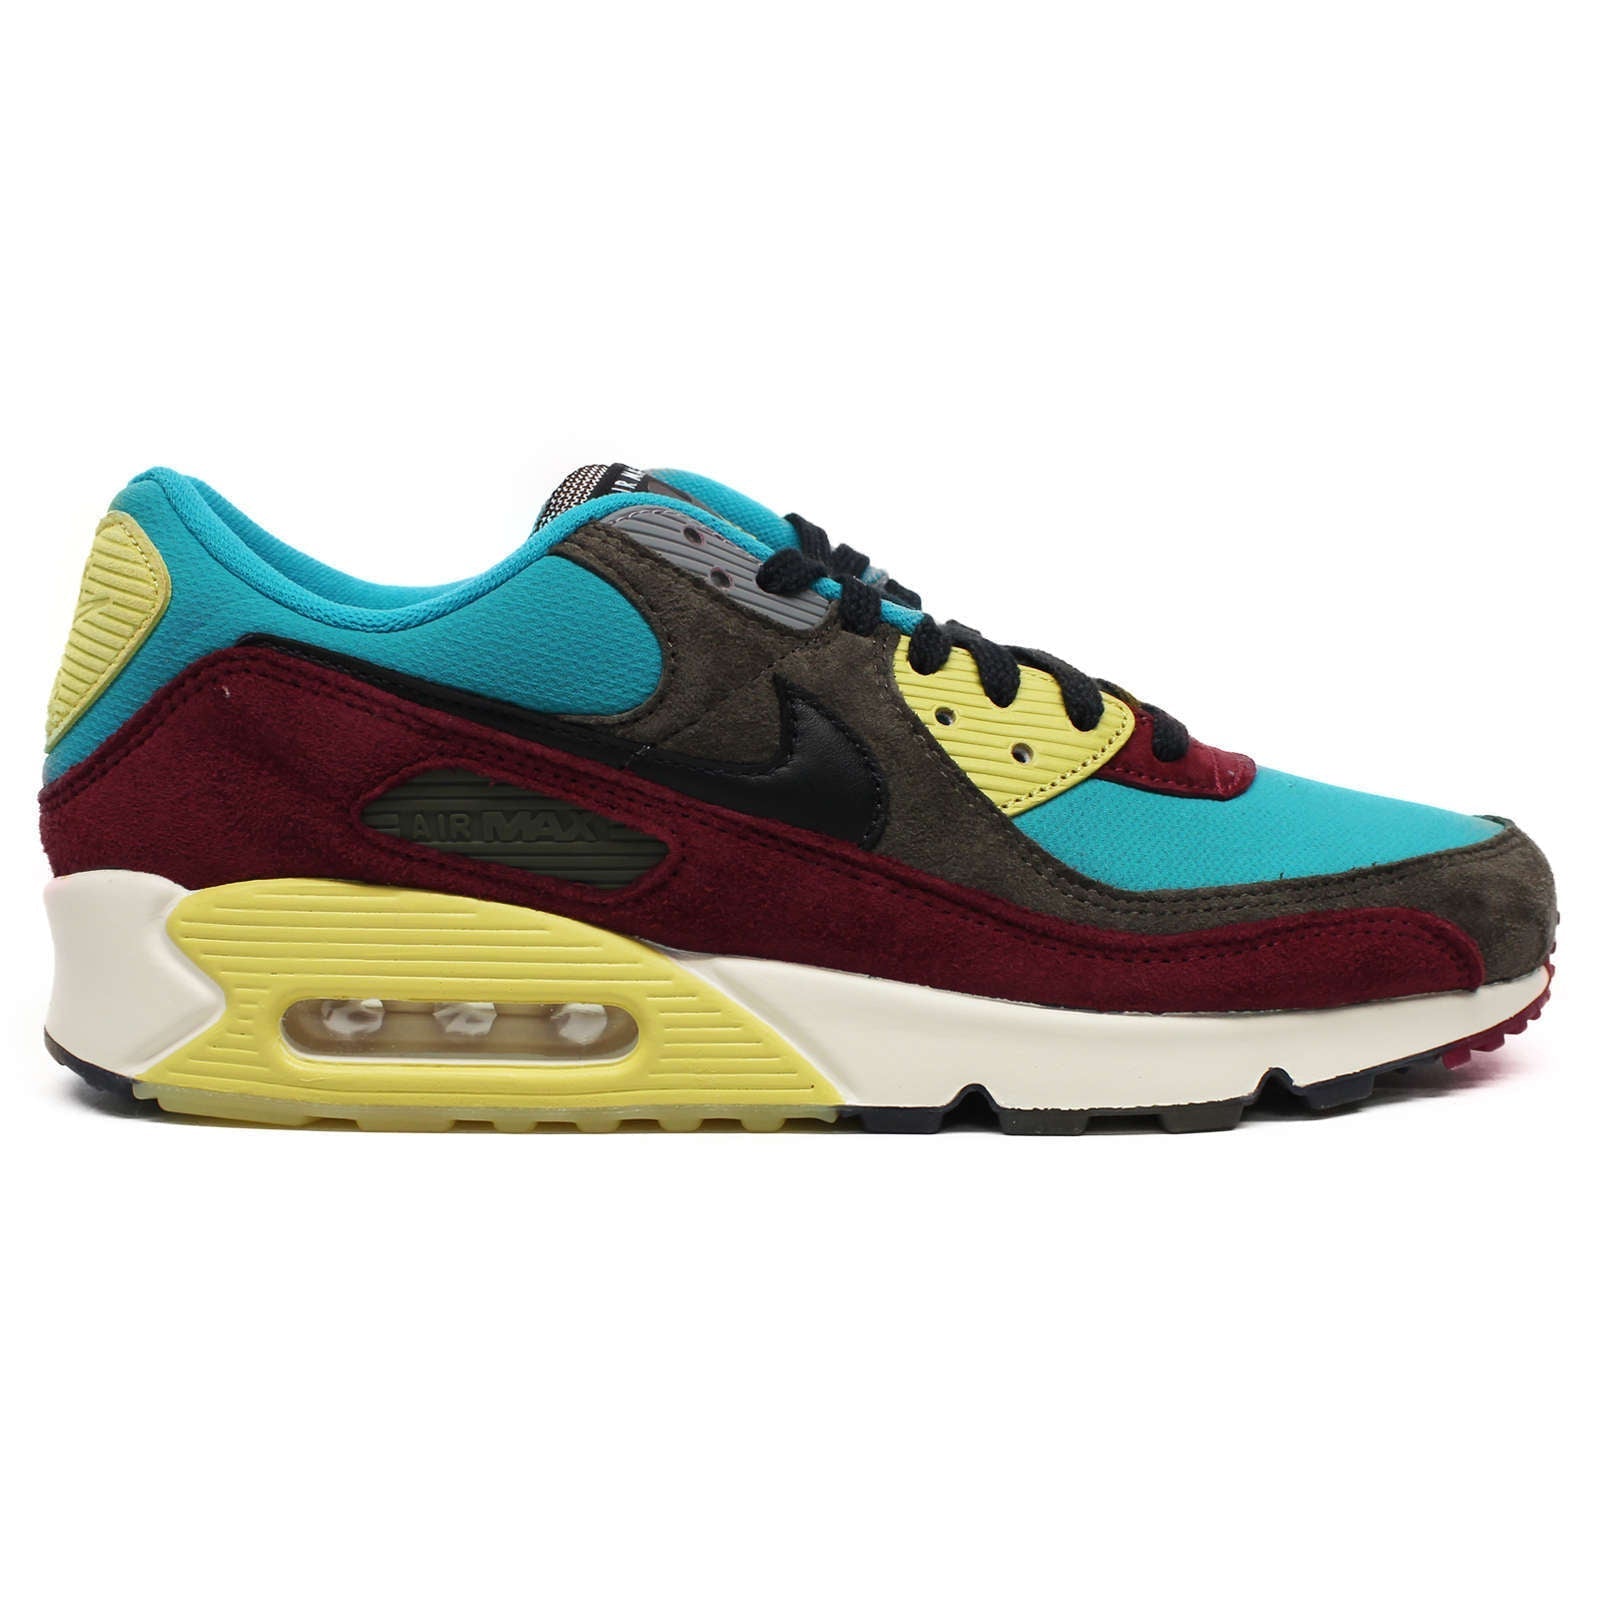 Nike Air Max 90 NRG Suede Leather Unisex Low-Top Sneakers#color_ridgerock black turbo green